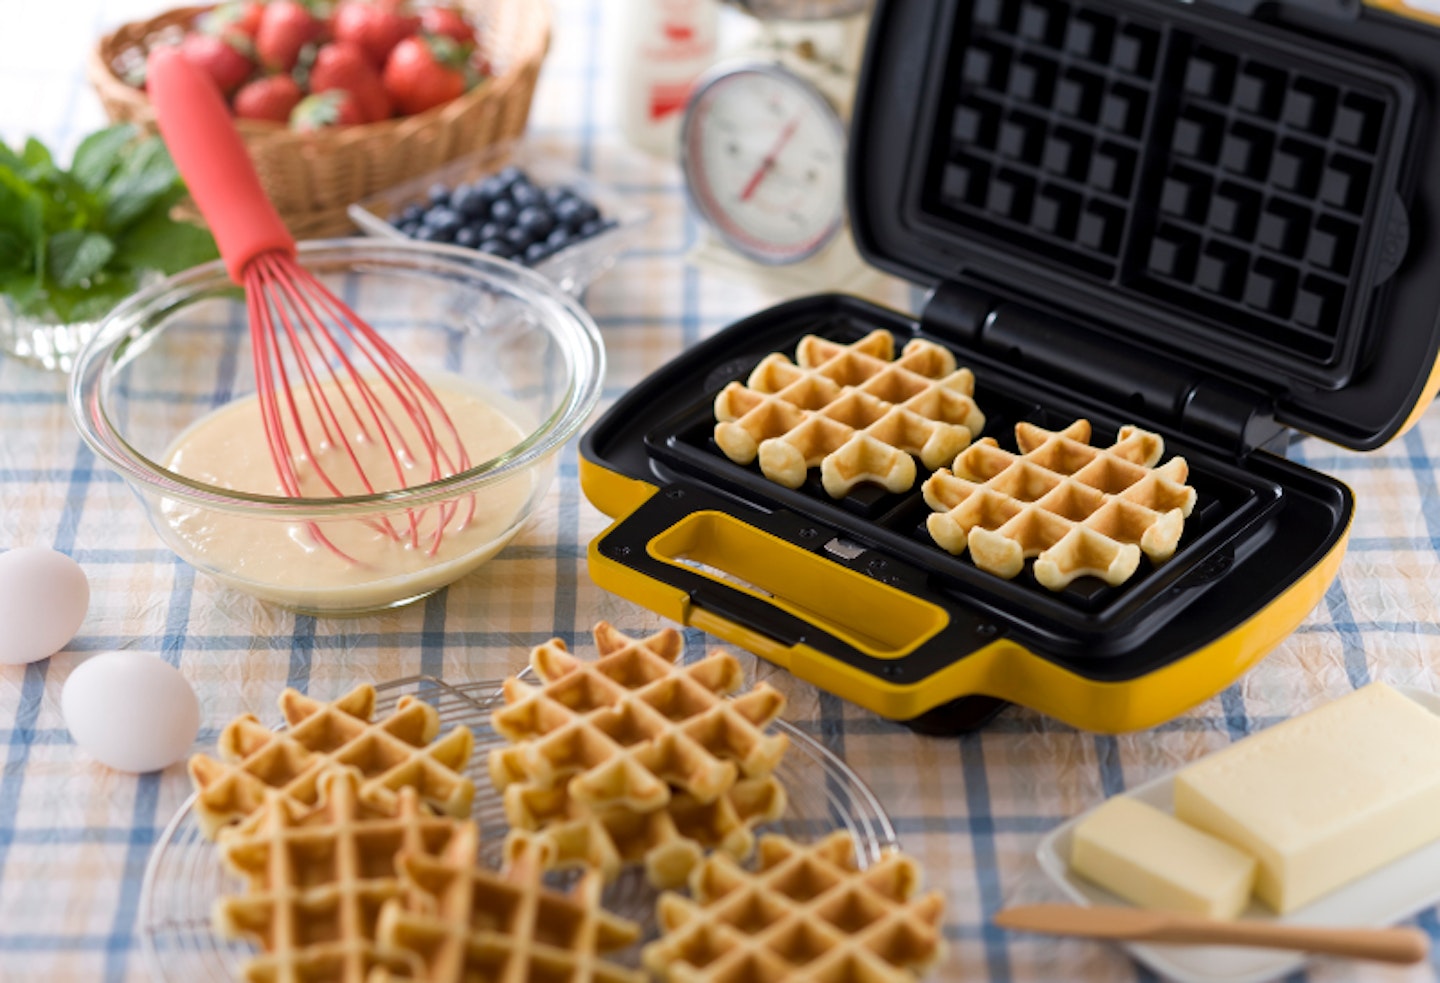 Waffle maker recipes inspired by Mrs Hinch